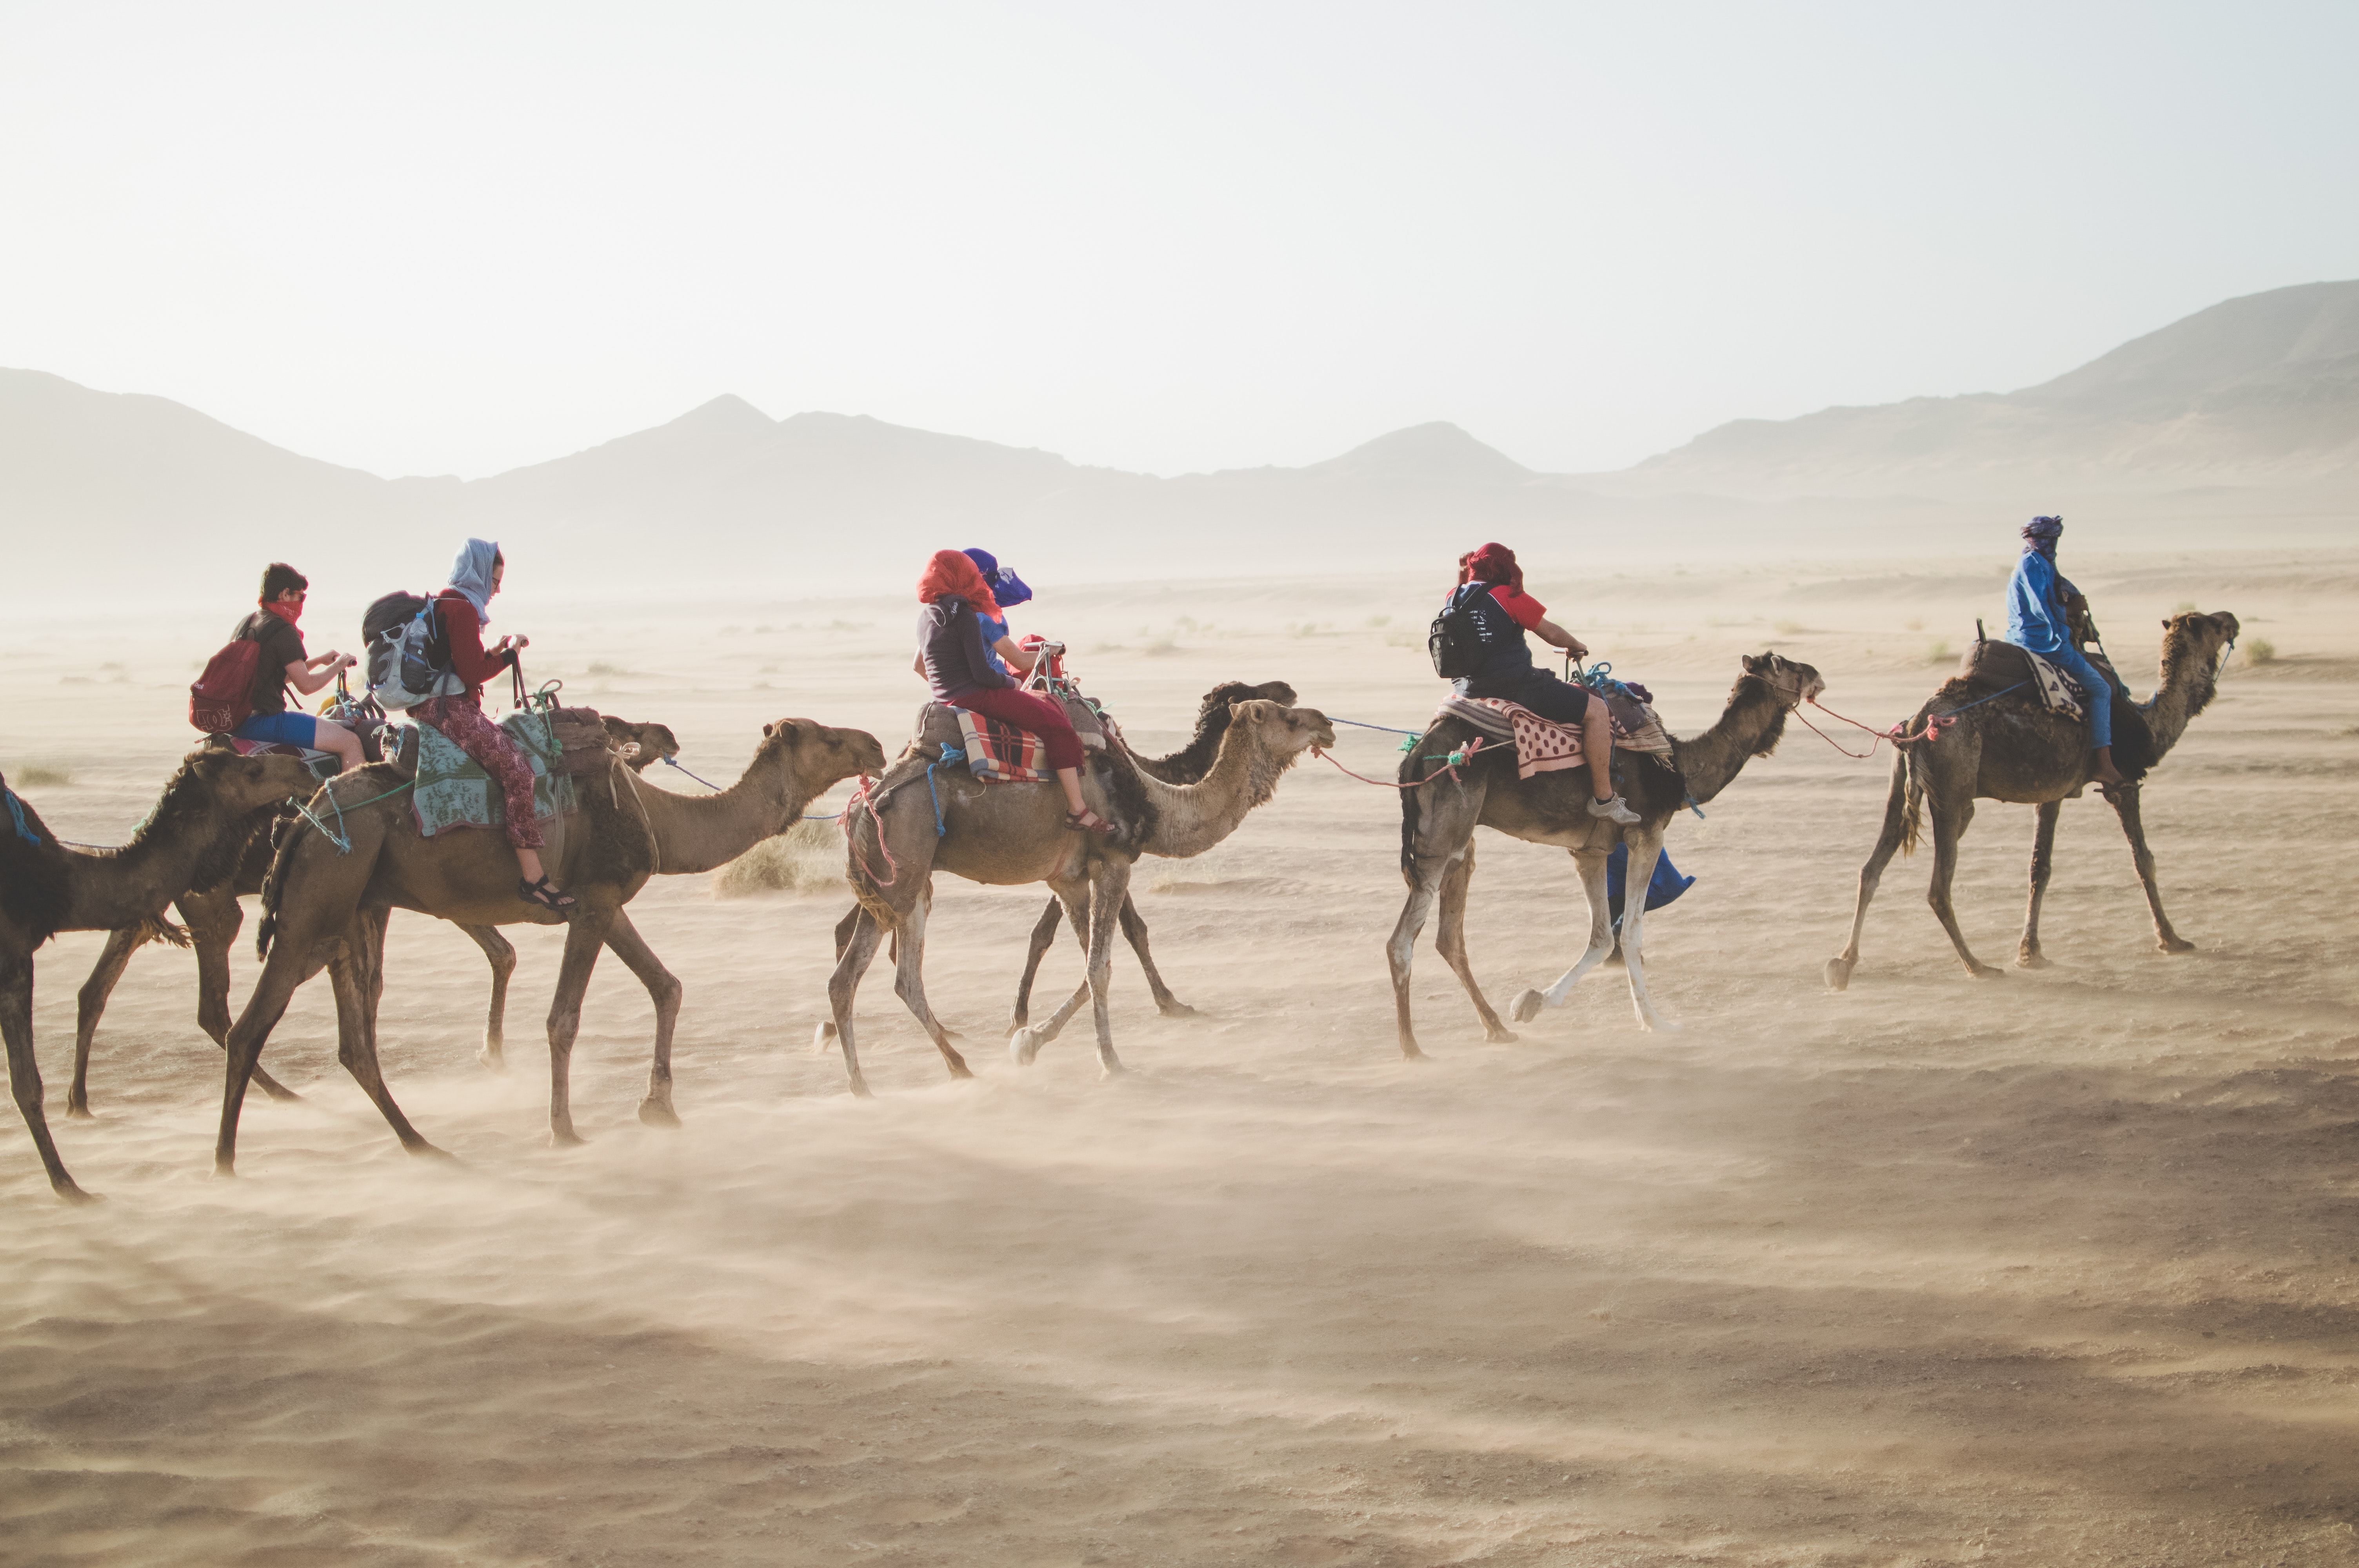 A group of people riding camels in Morocco